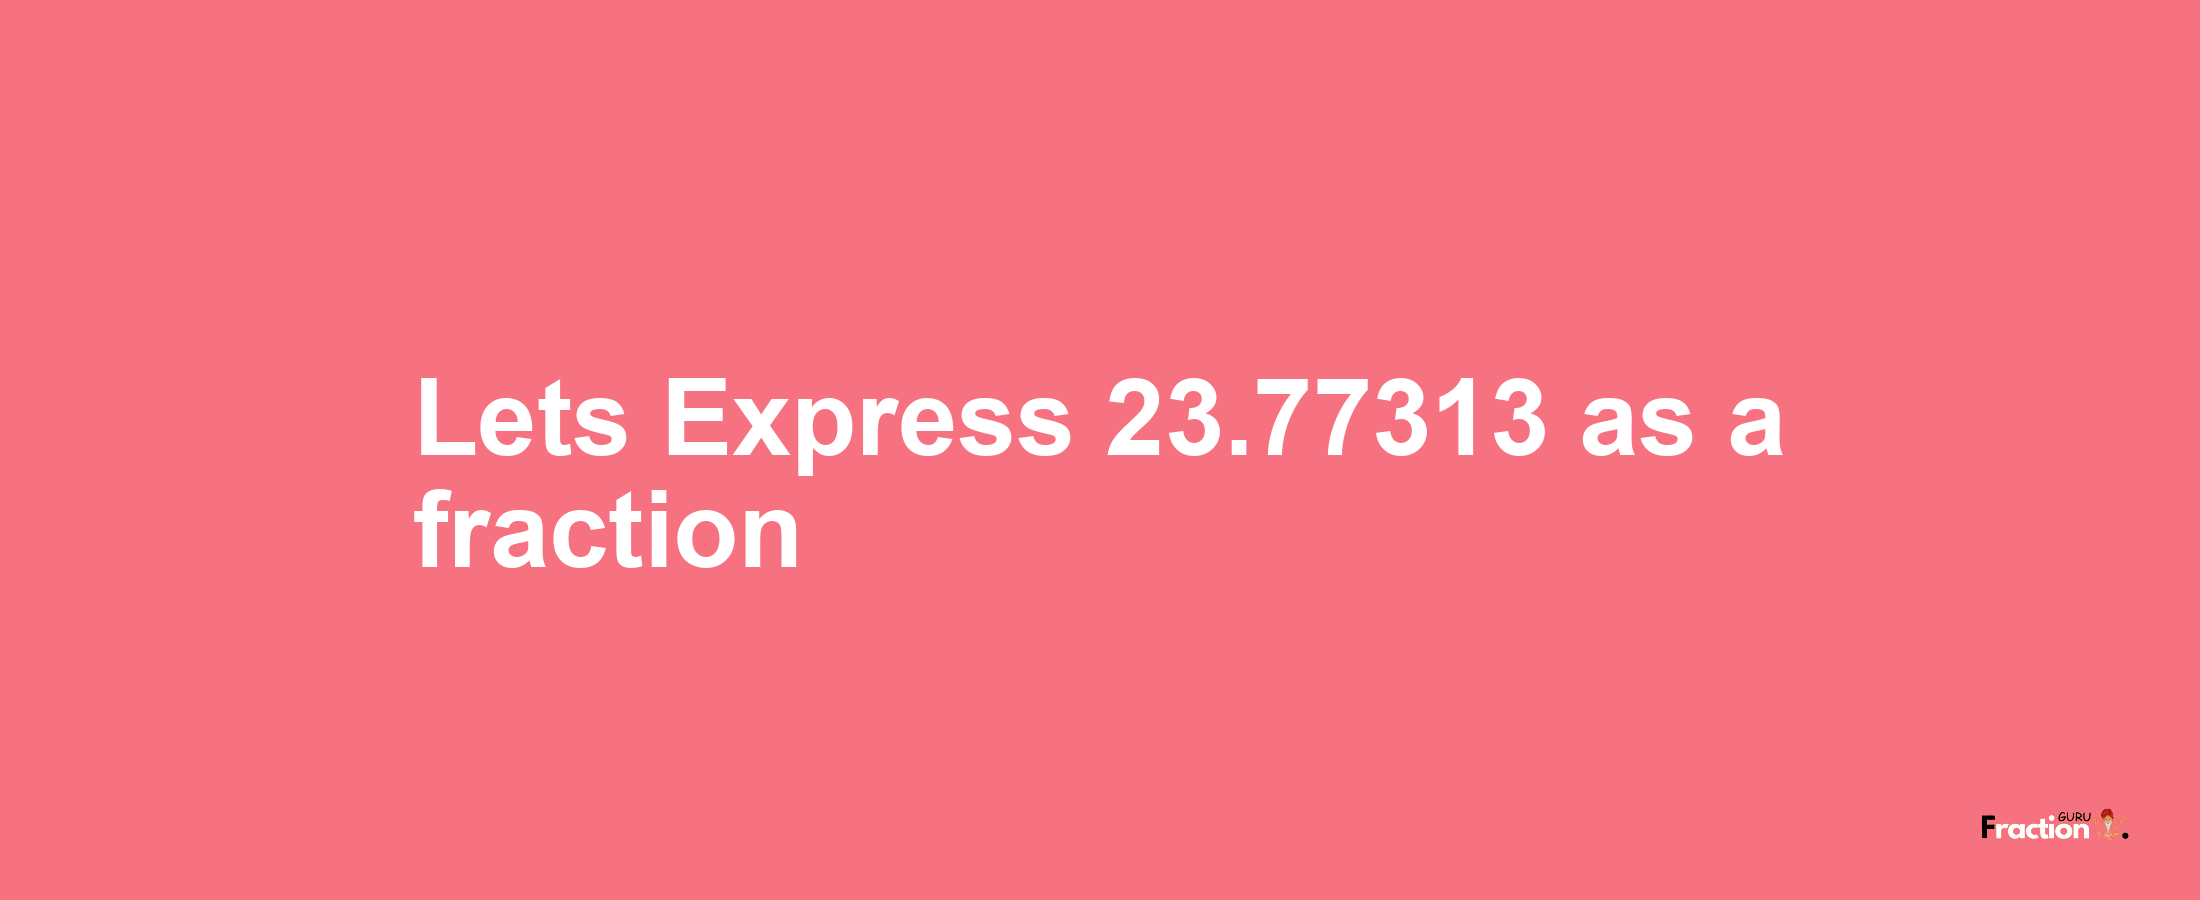 Lets Express 23.77313 as afraction